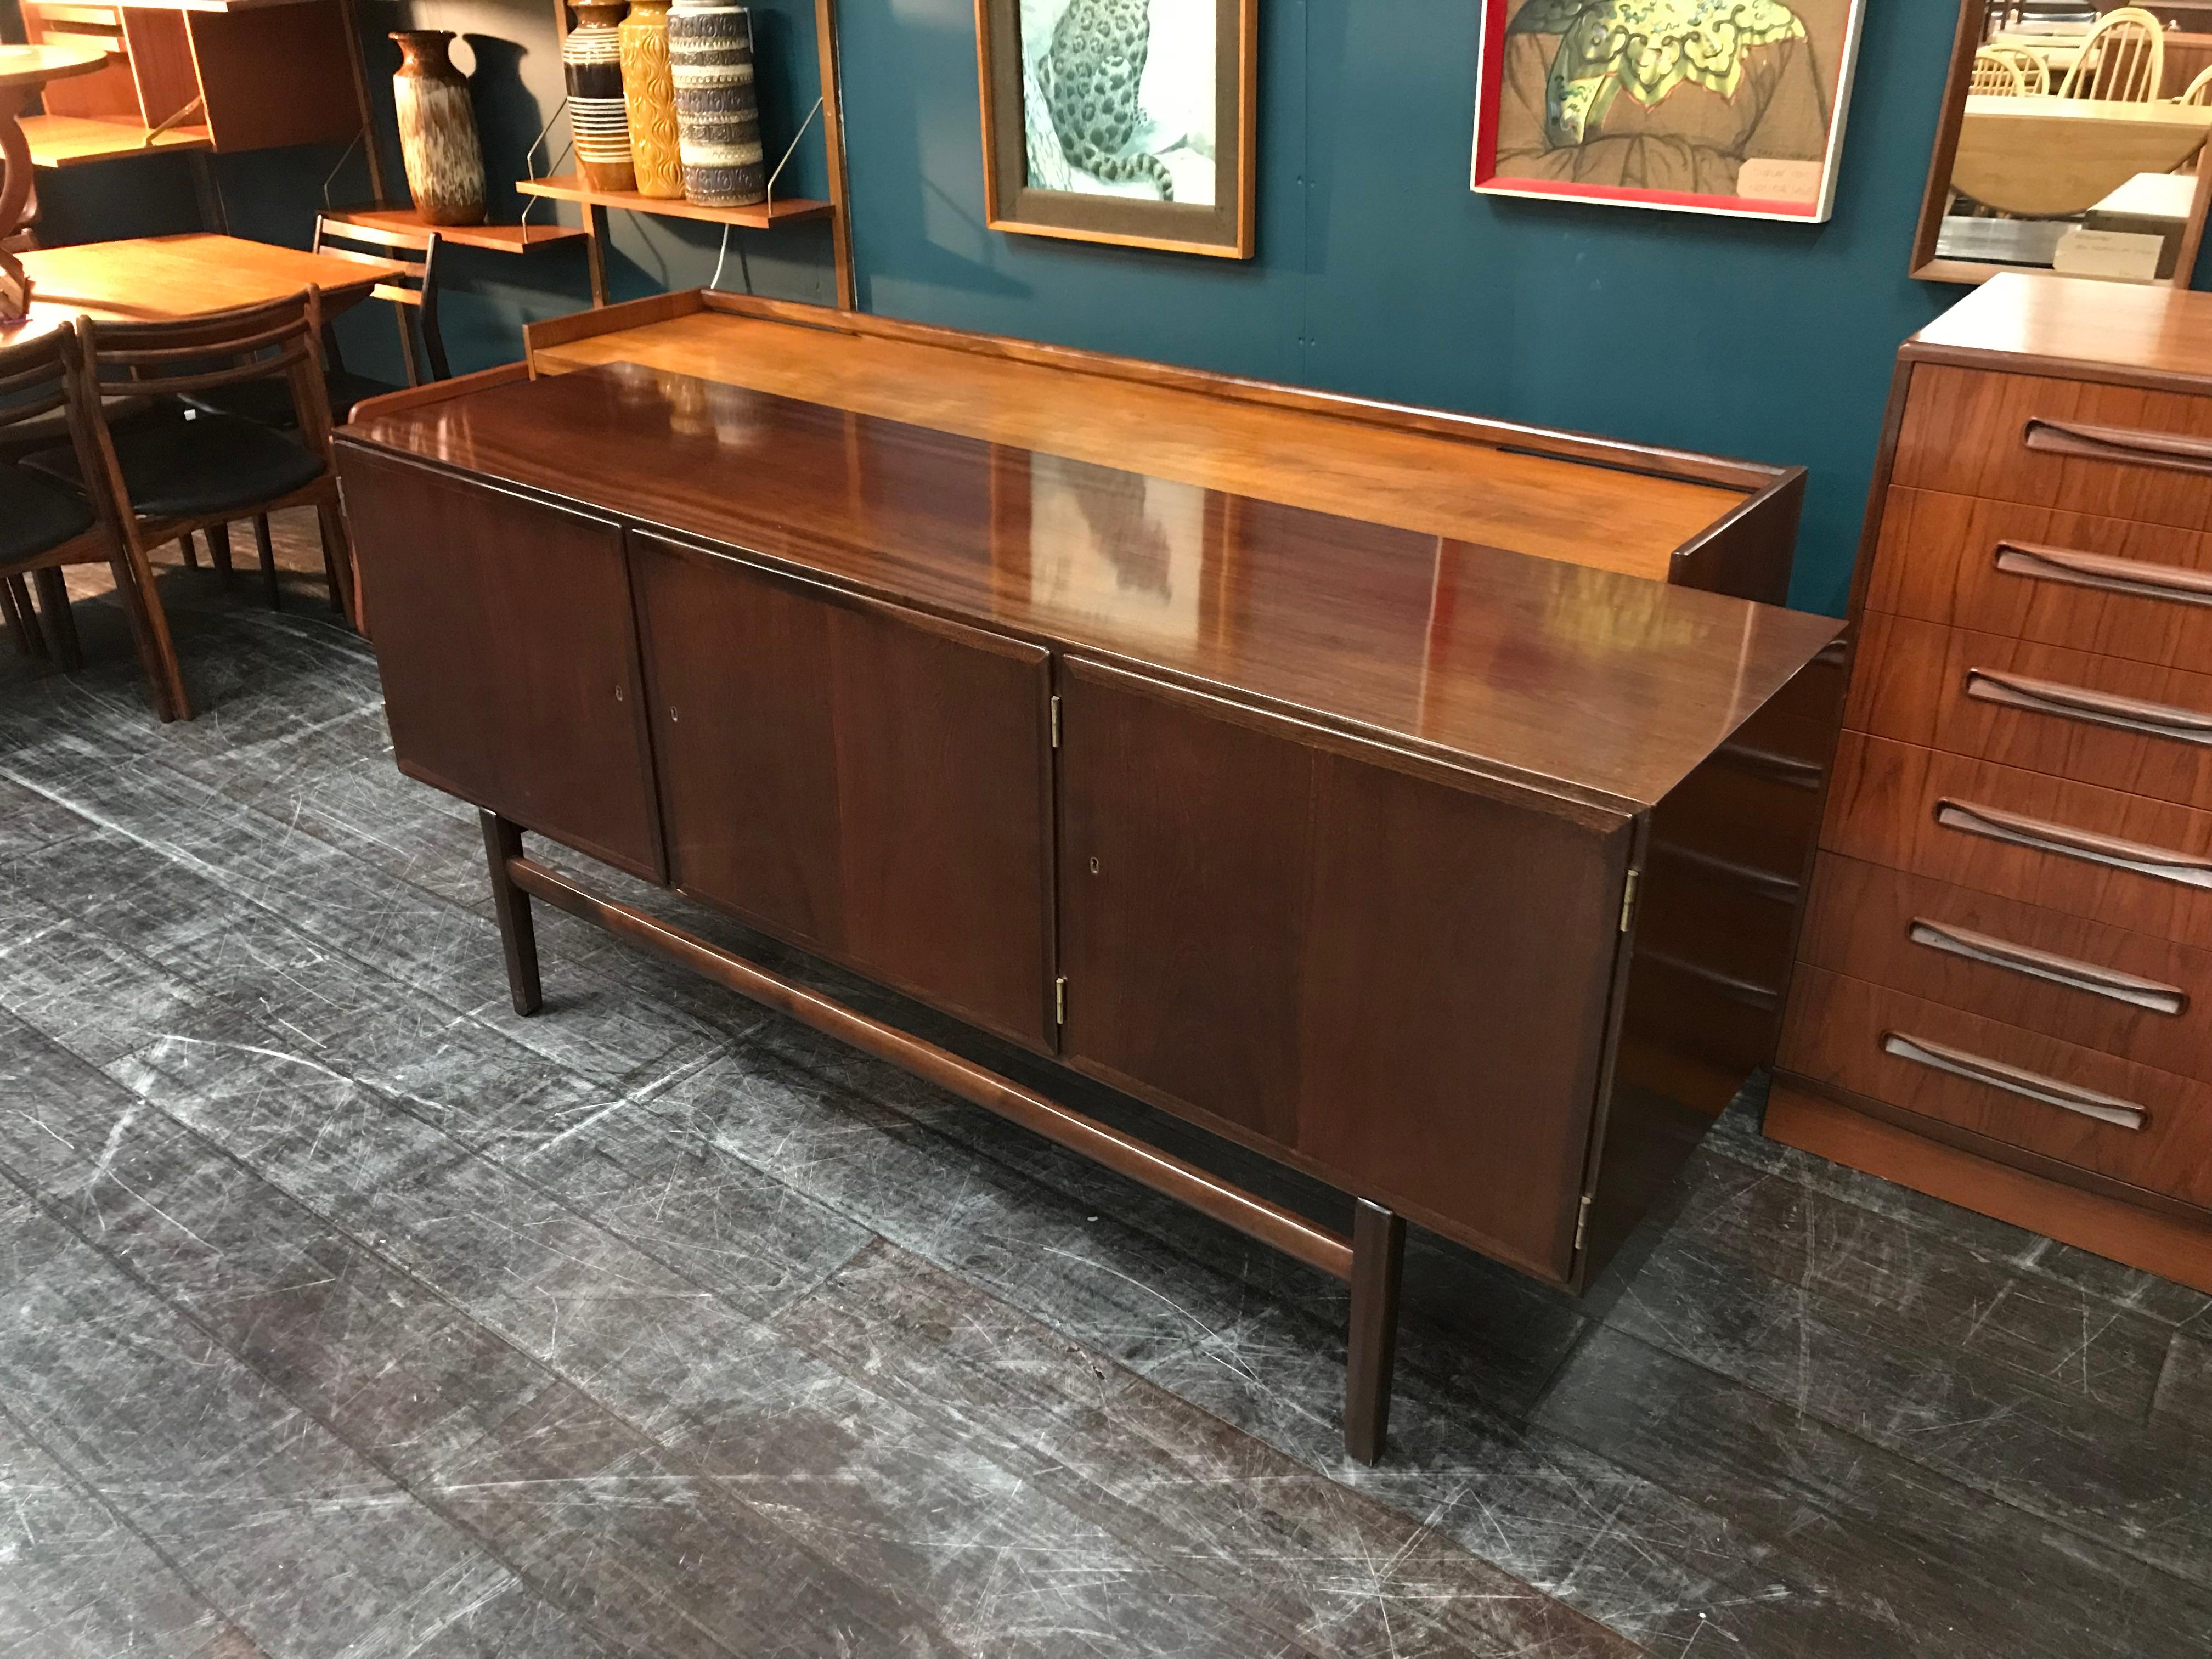 20th Century Danish Midcentury Mahogany Sideboard by Ole Wanscher for Poul Jeppesen For Sale